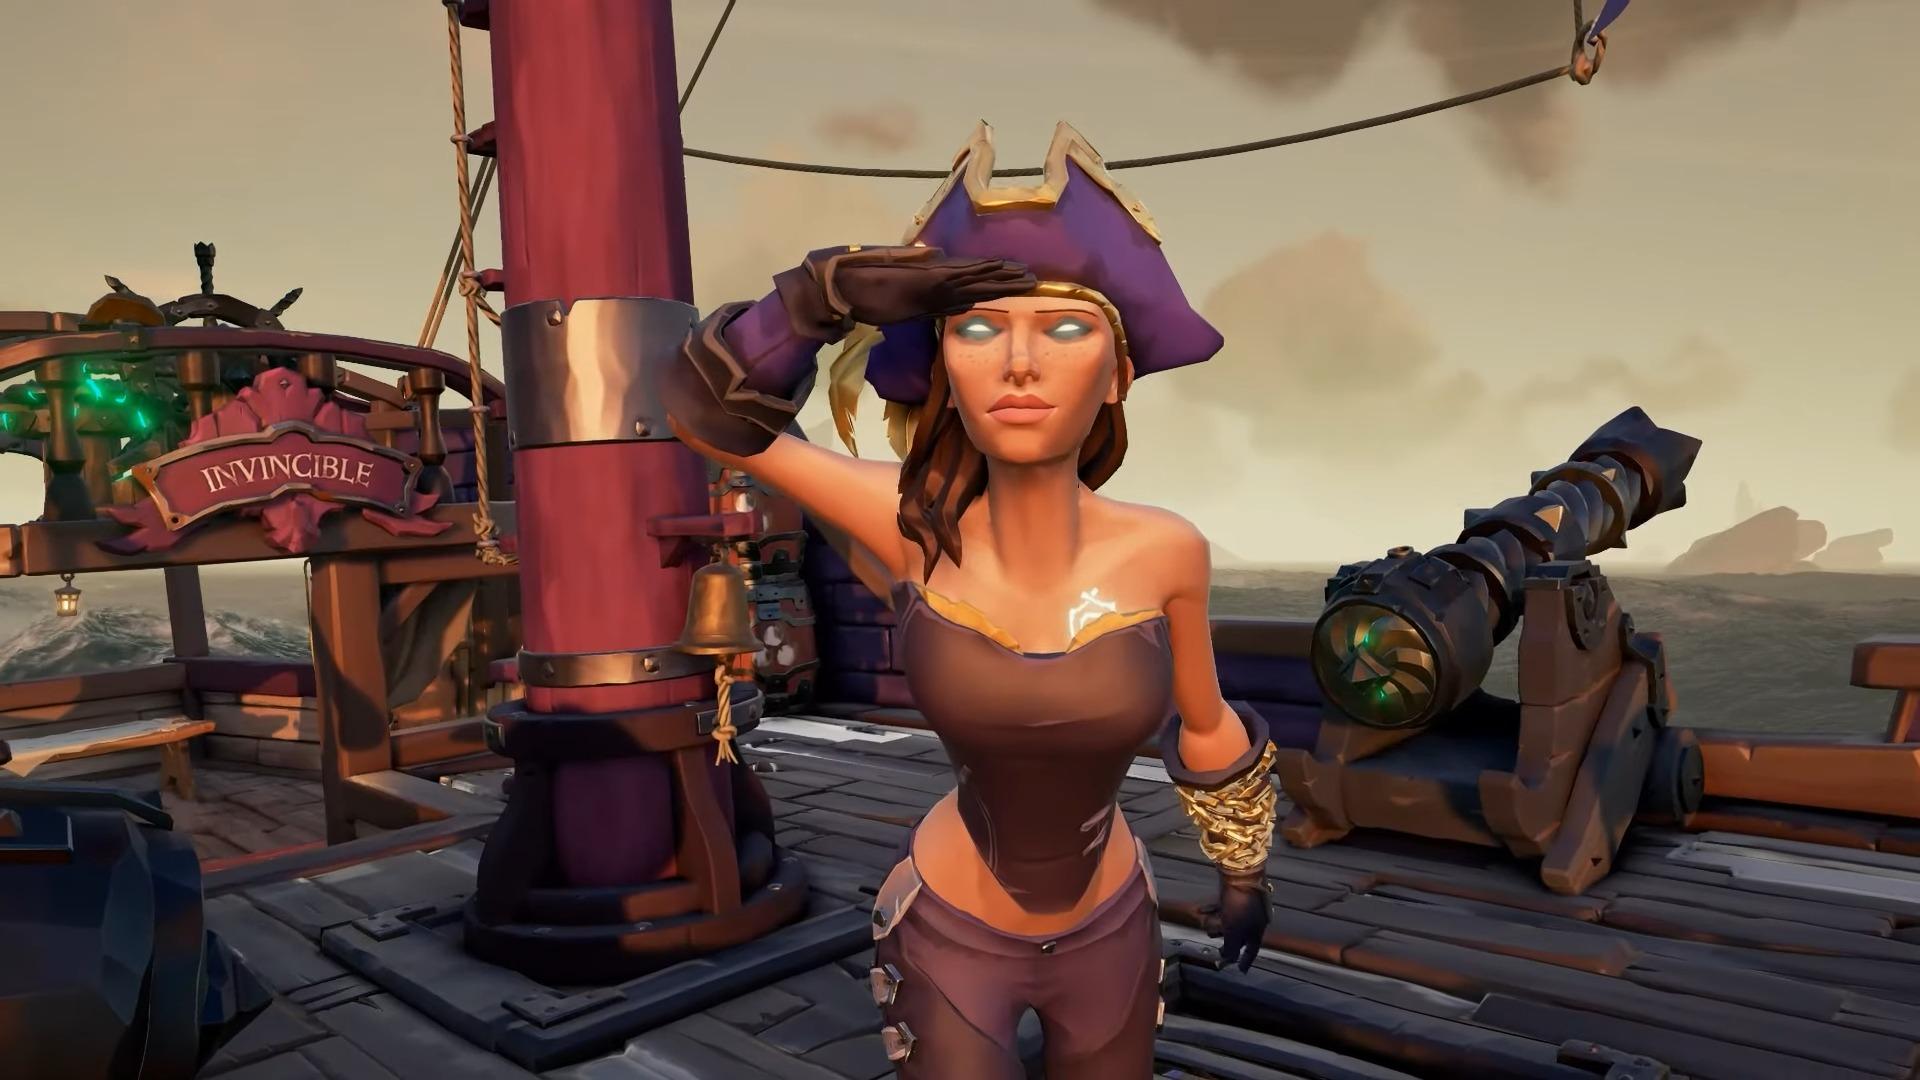 The Legendary Curse in Sea of Thieves